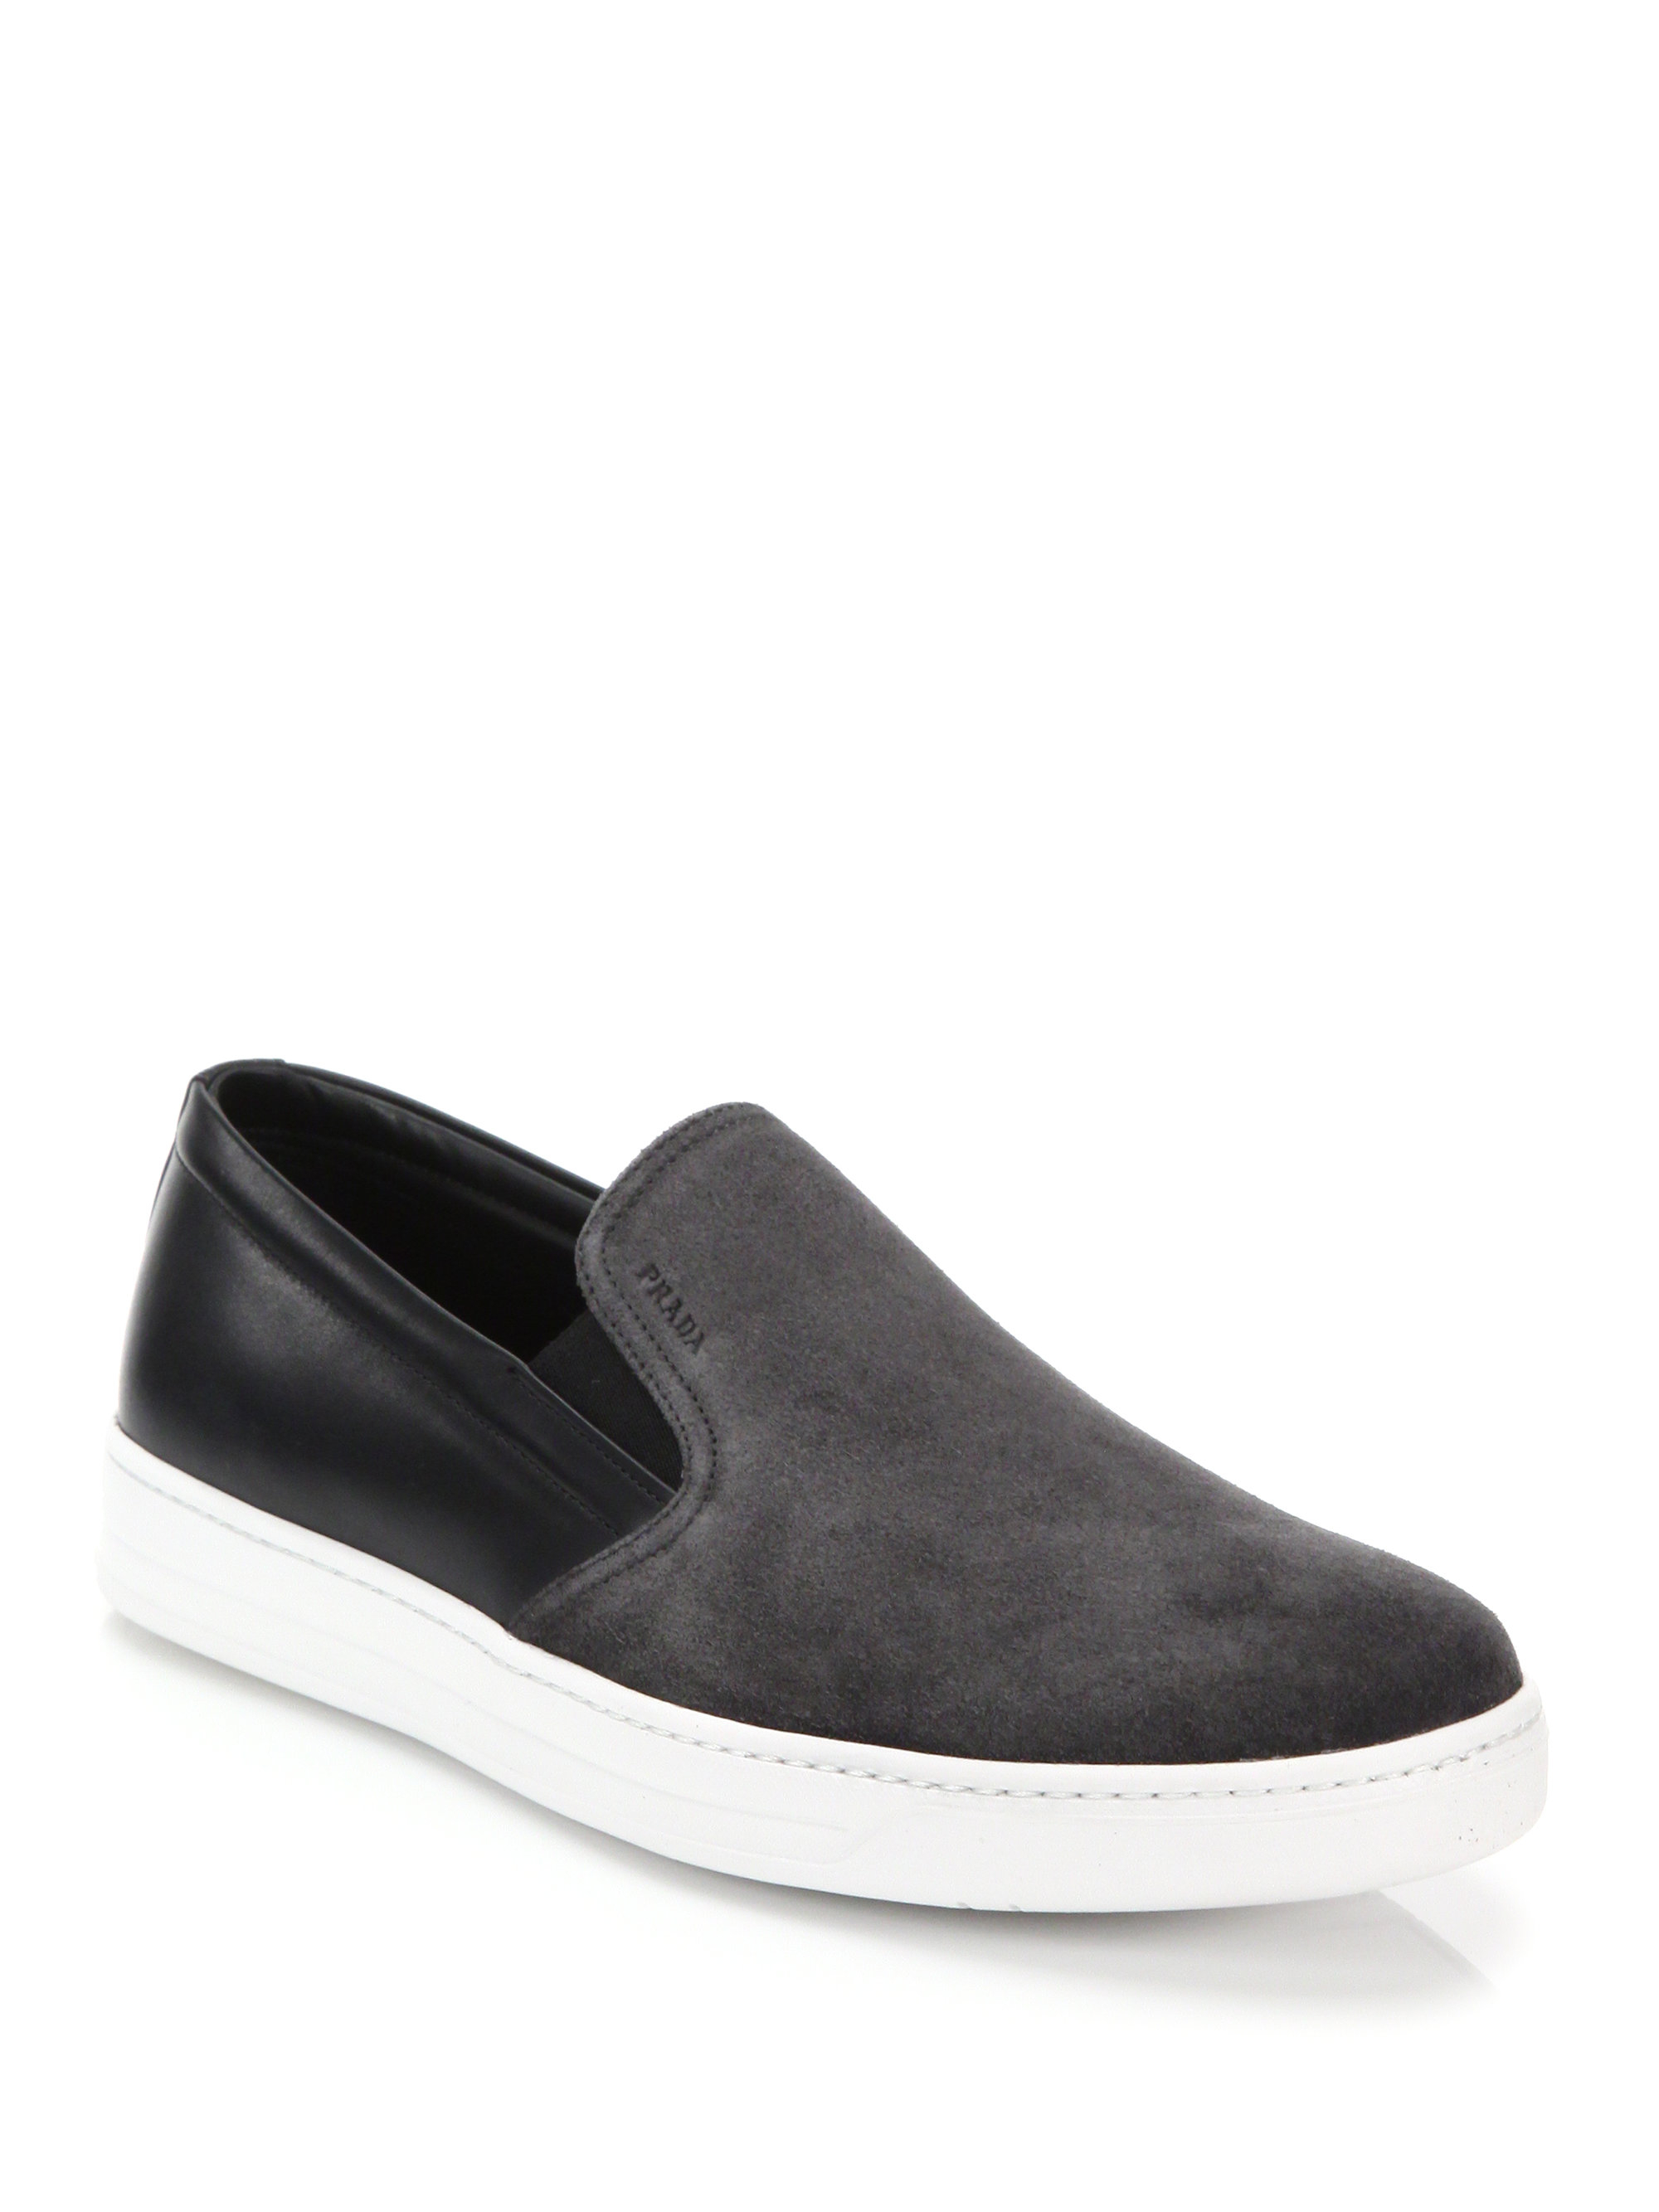 Prada Mixed-media Leather & Suede Slip-on Sneakers in Gray for Men ...